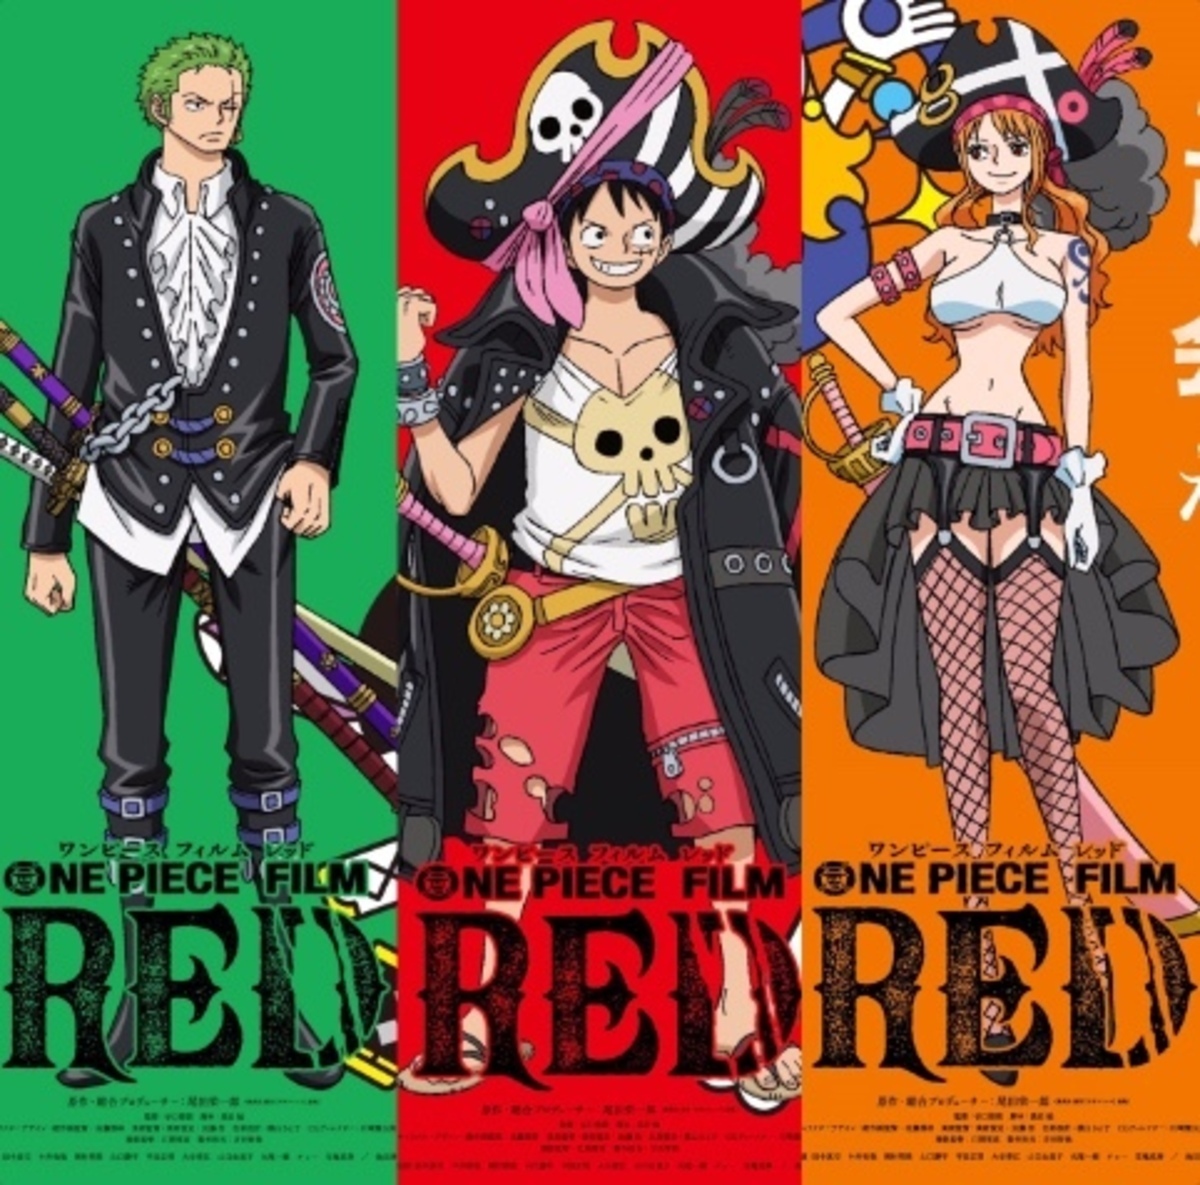 Exclusive Access: One Piece Film Red Dubbed in Thai and Copyrighted Only Here!